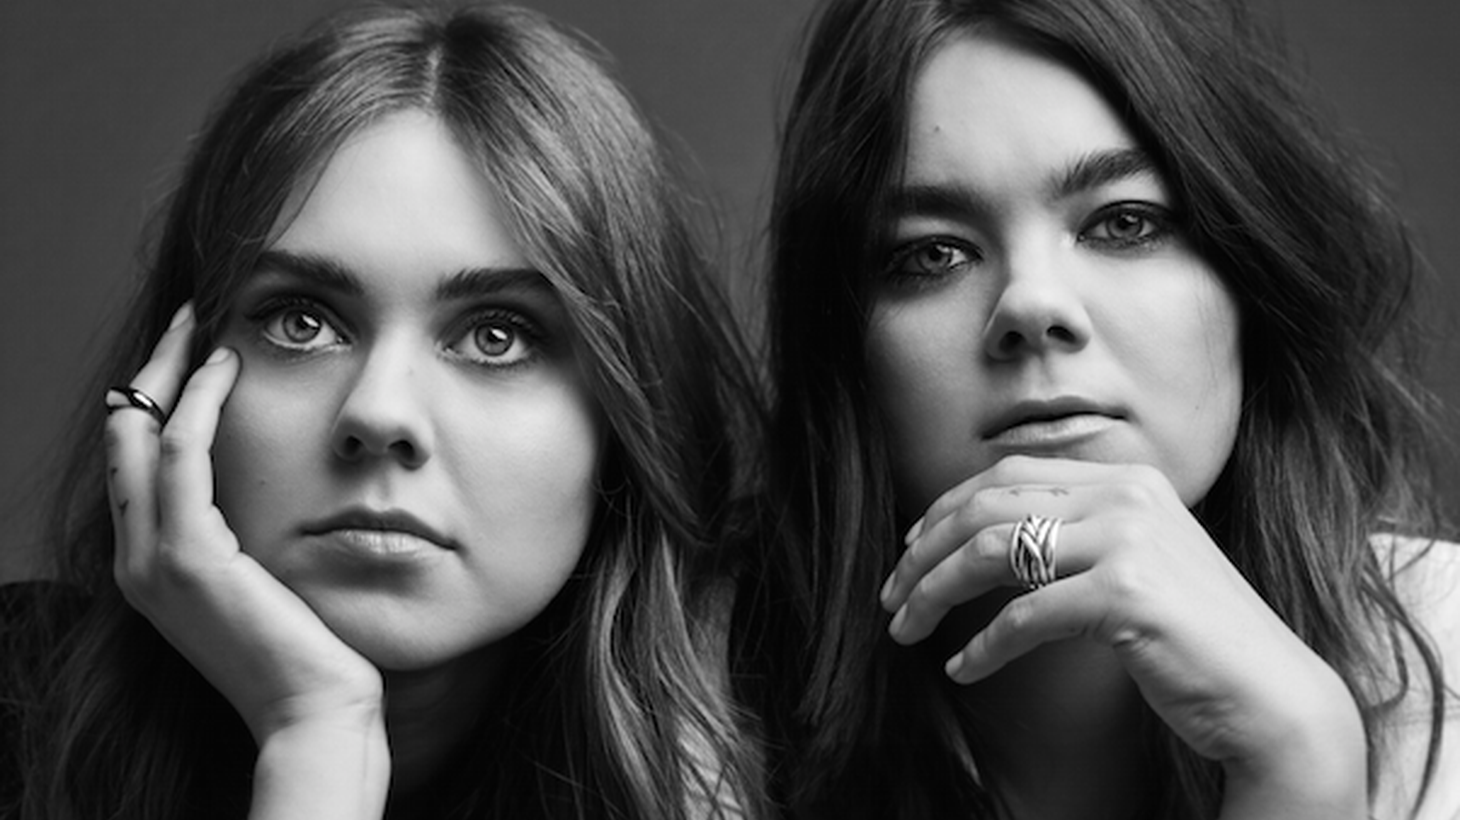 We host charming Swedish sister duo First Aid Kit for a live performance just days after the release of their new record “Ruins.”